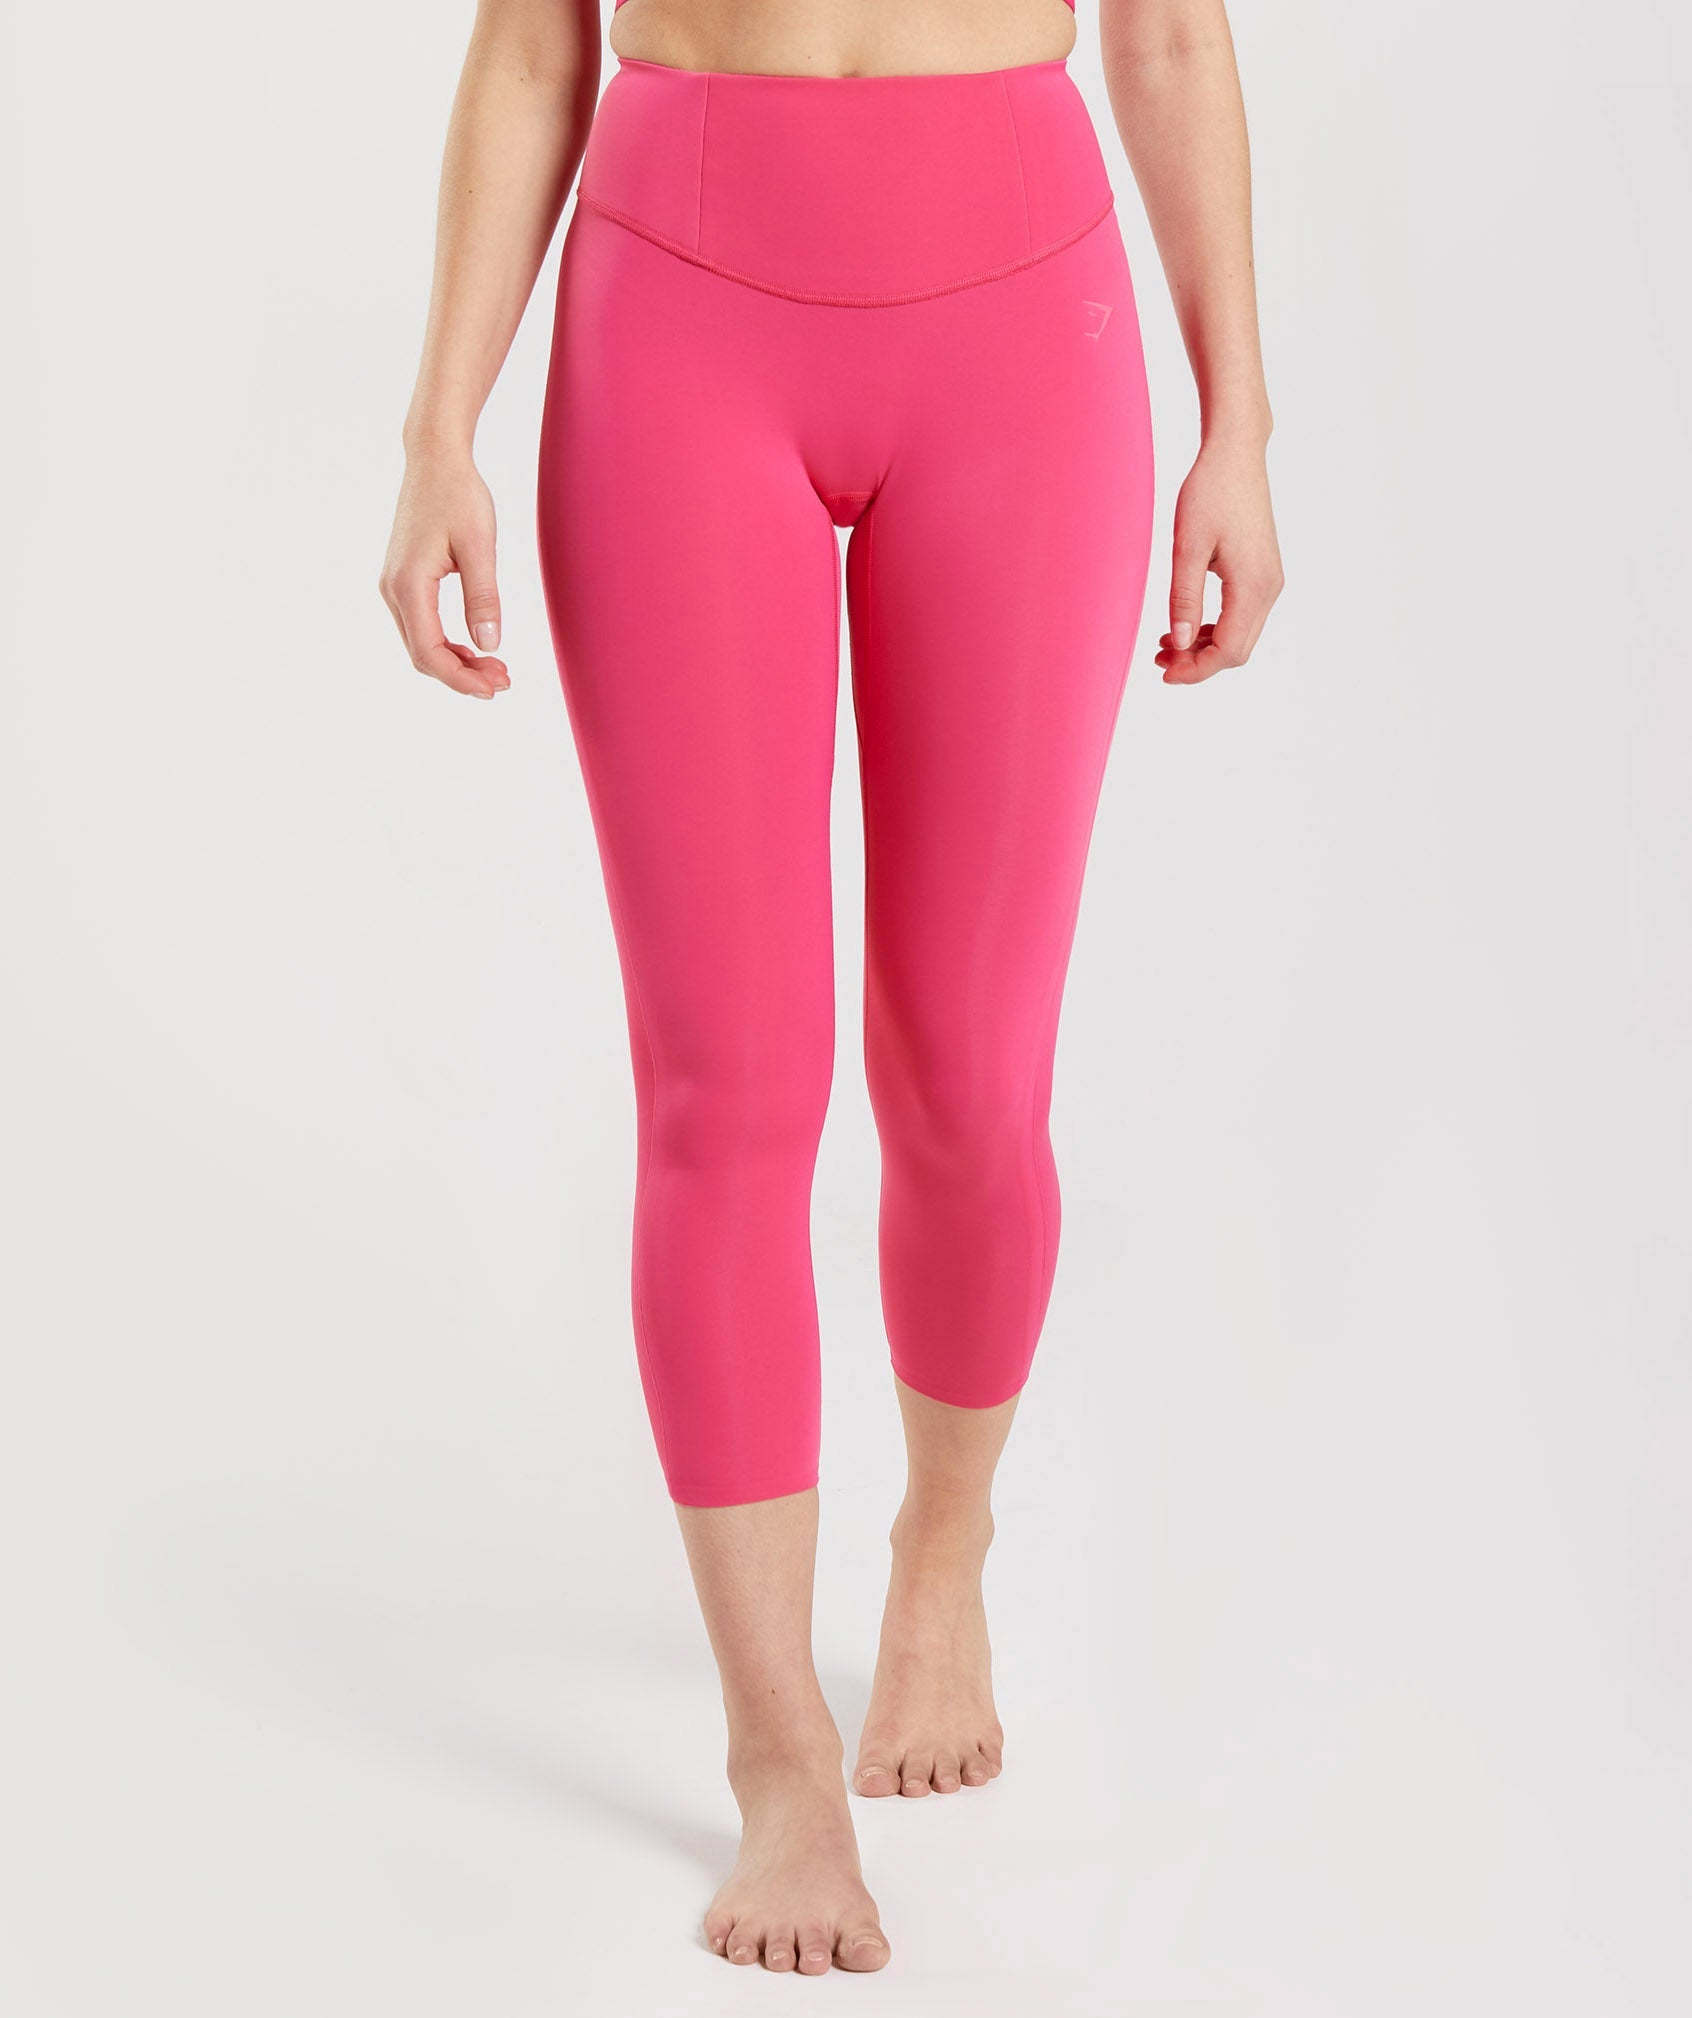 Melody Pink Light Pink Tights For Women Cool, Comfy Leggings For Summer Gym  And Shaping From Shascullfites, $25.61